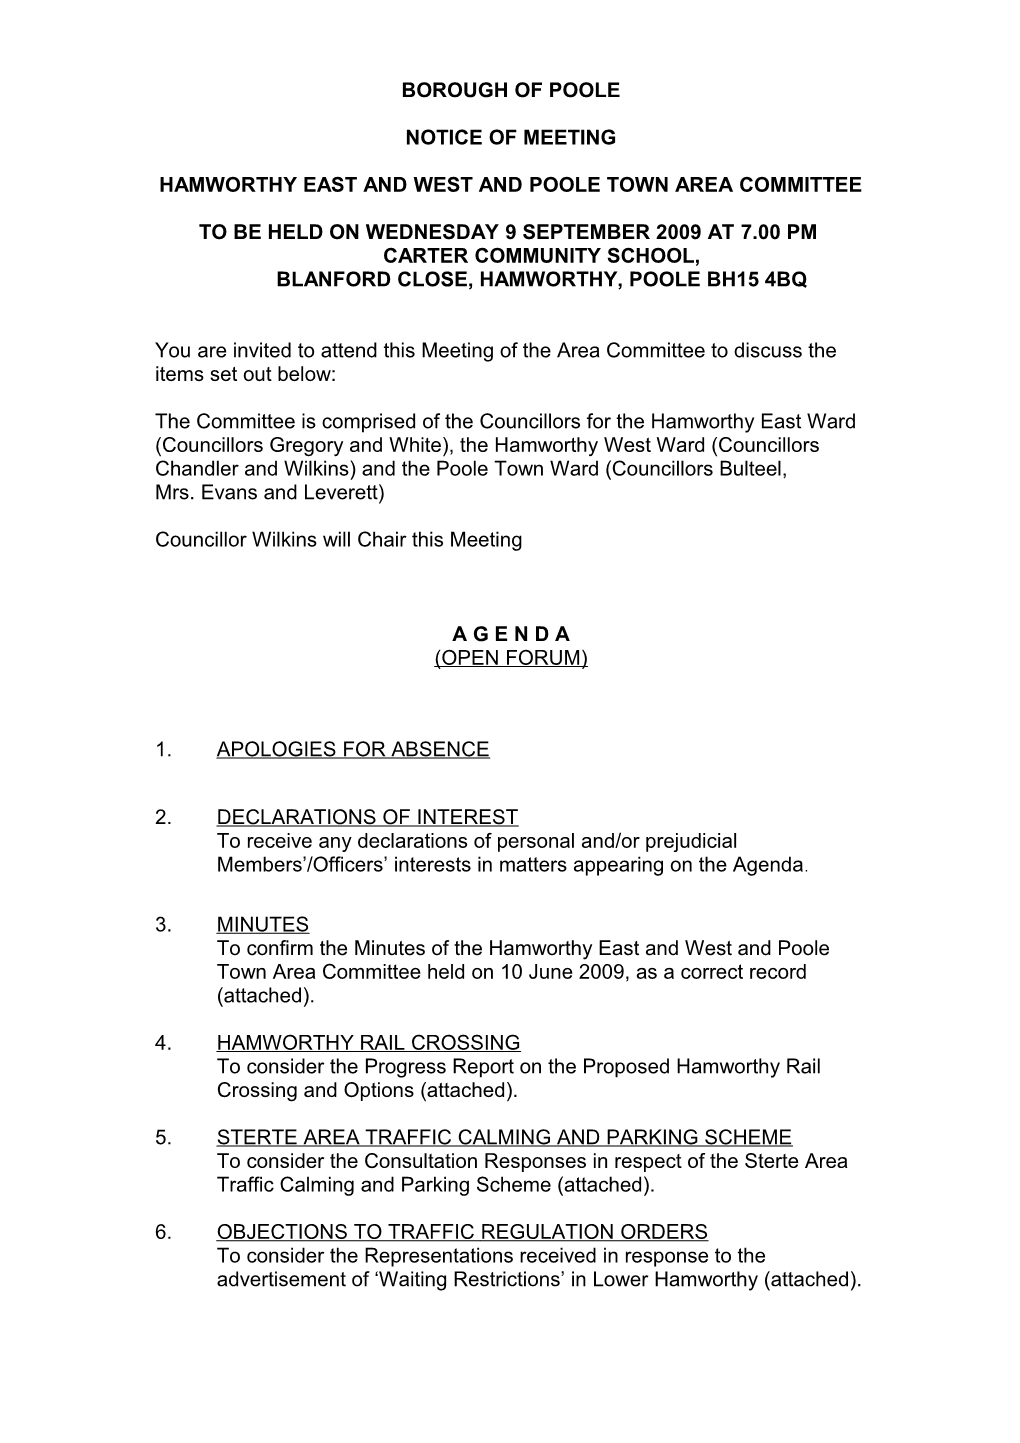 Agenda - Hamworthy East and West and Poole Town Area Committee - 9 September 2009